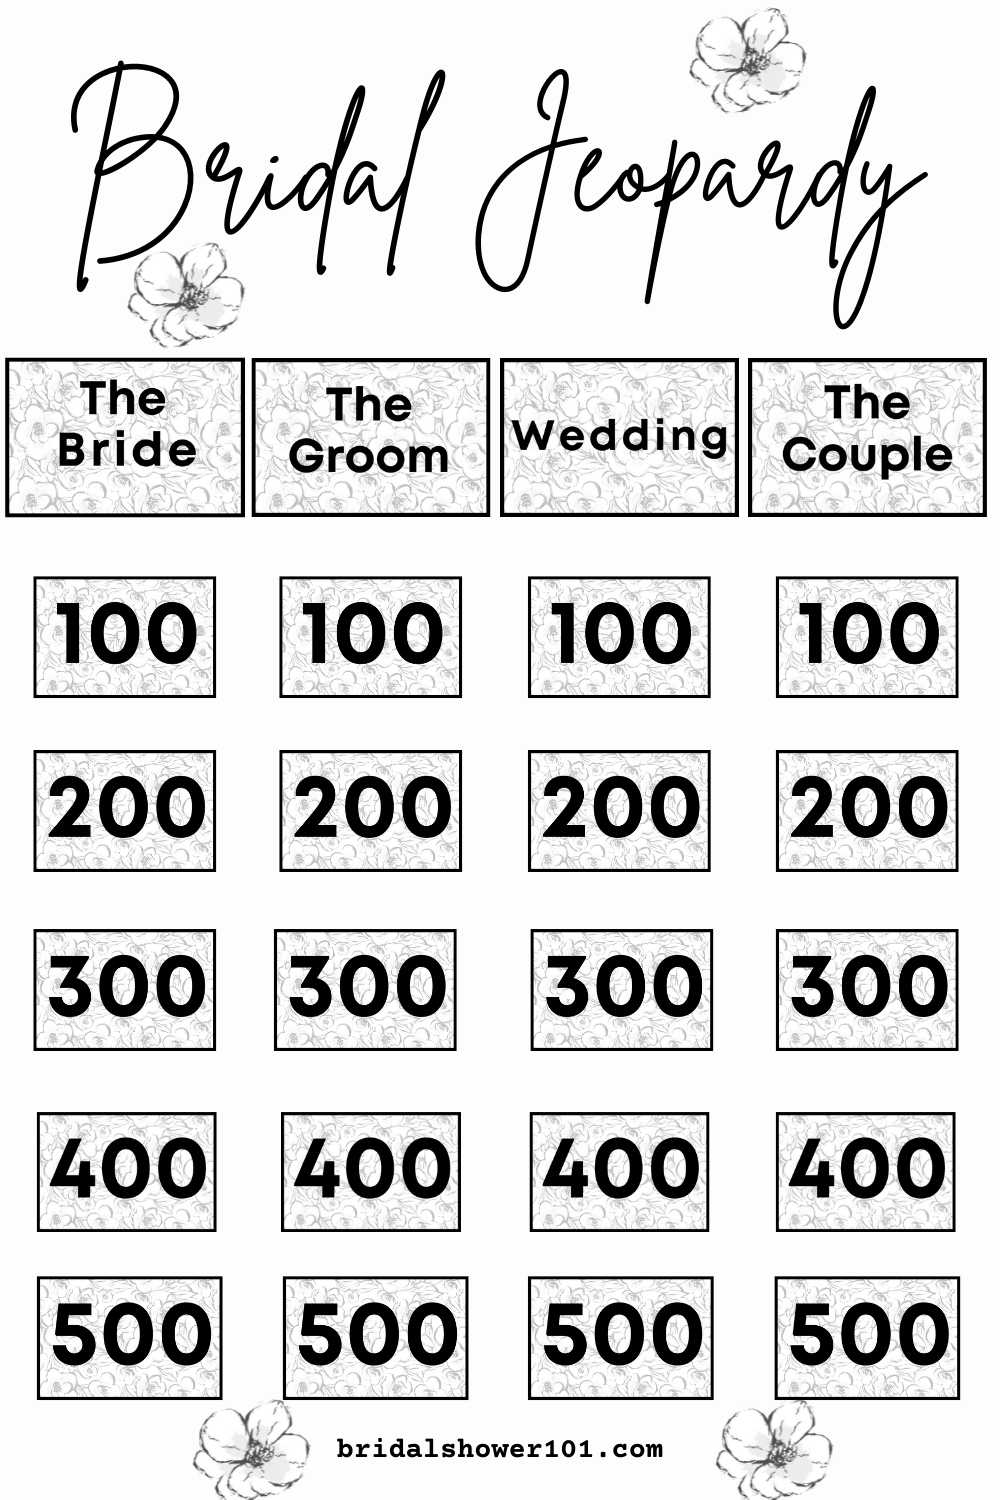 77 Bridal Jeopardy Questions (Free Game Included!) Bridal Shower 101